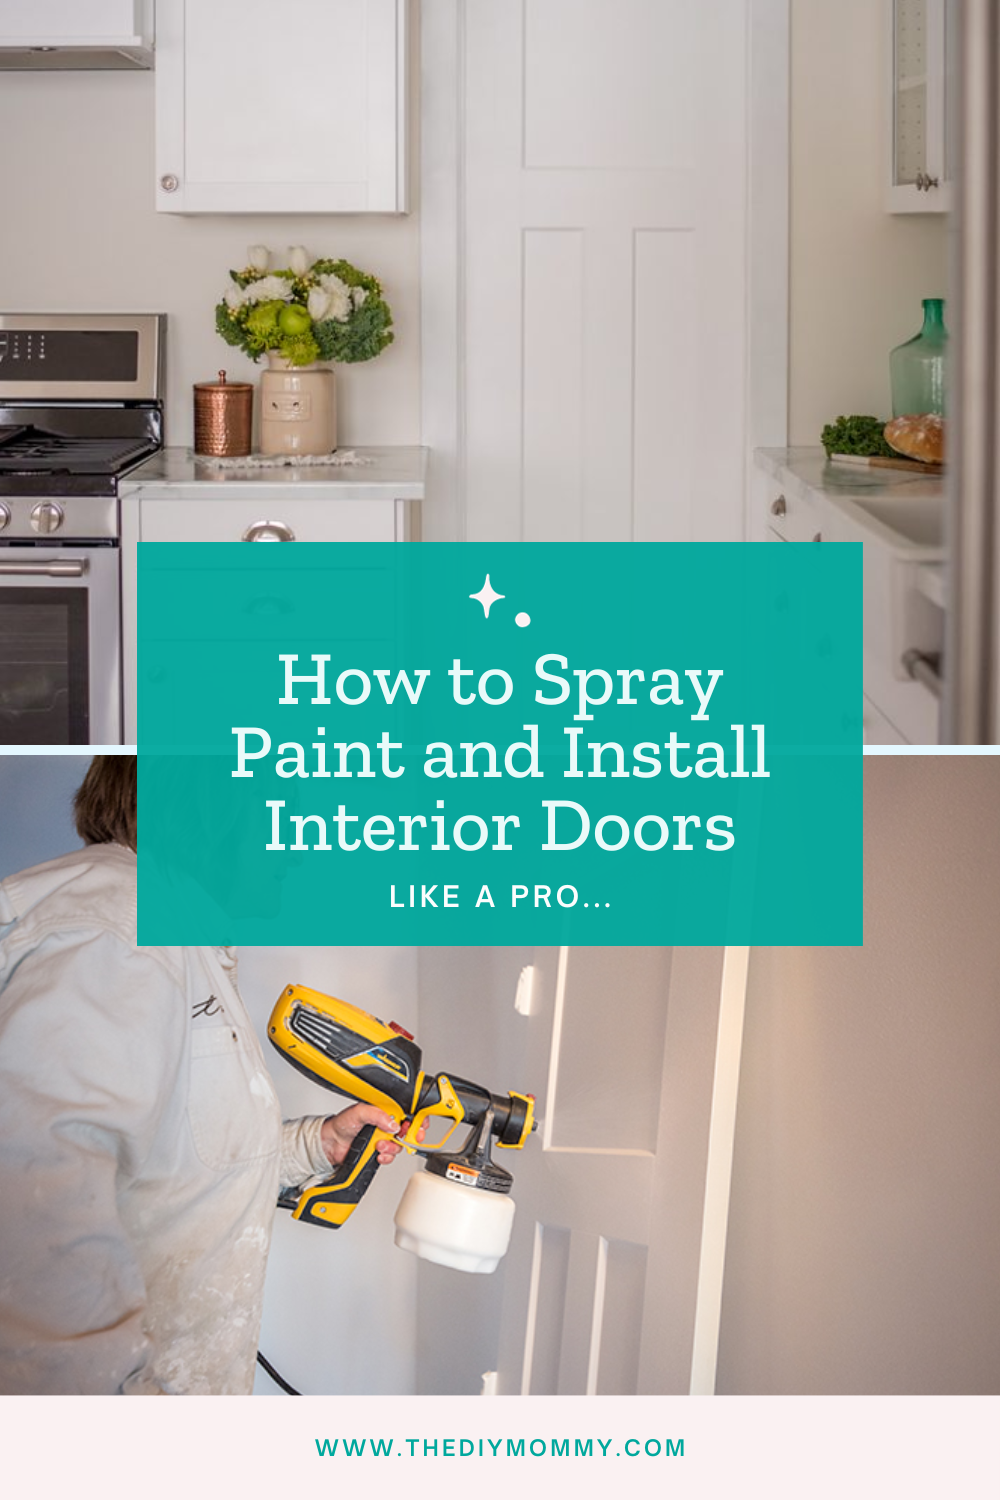 How to Spray Paint and Install Interior Doors Like a Pro